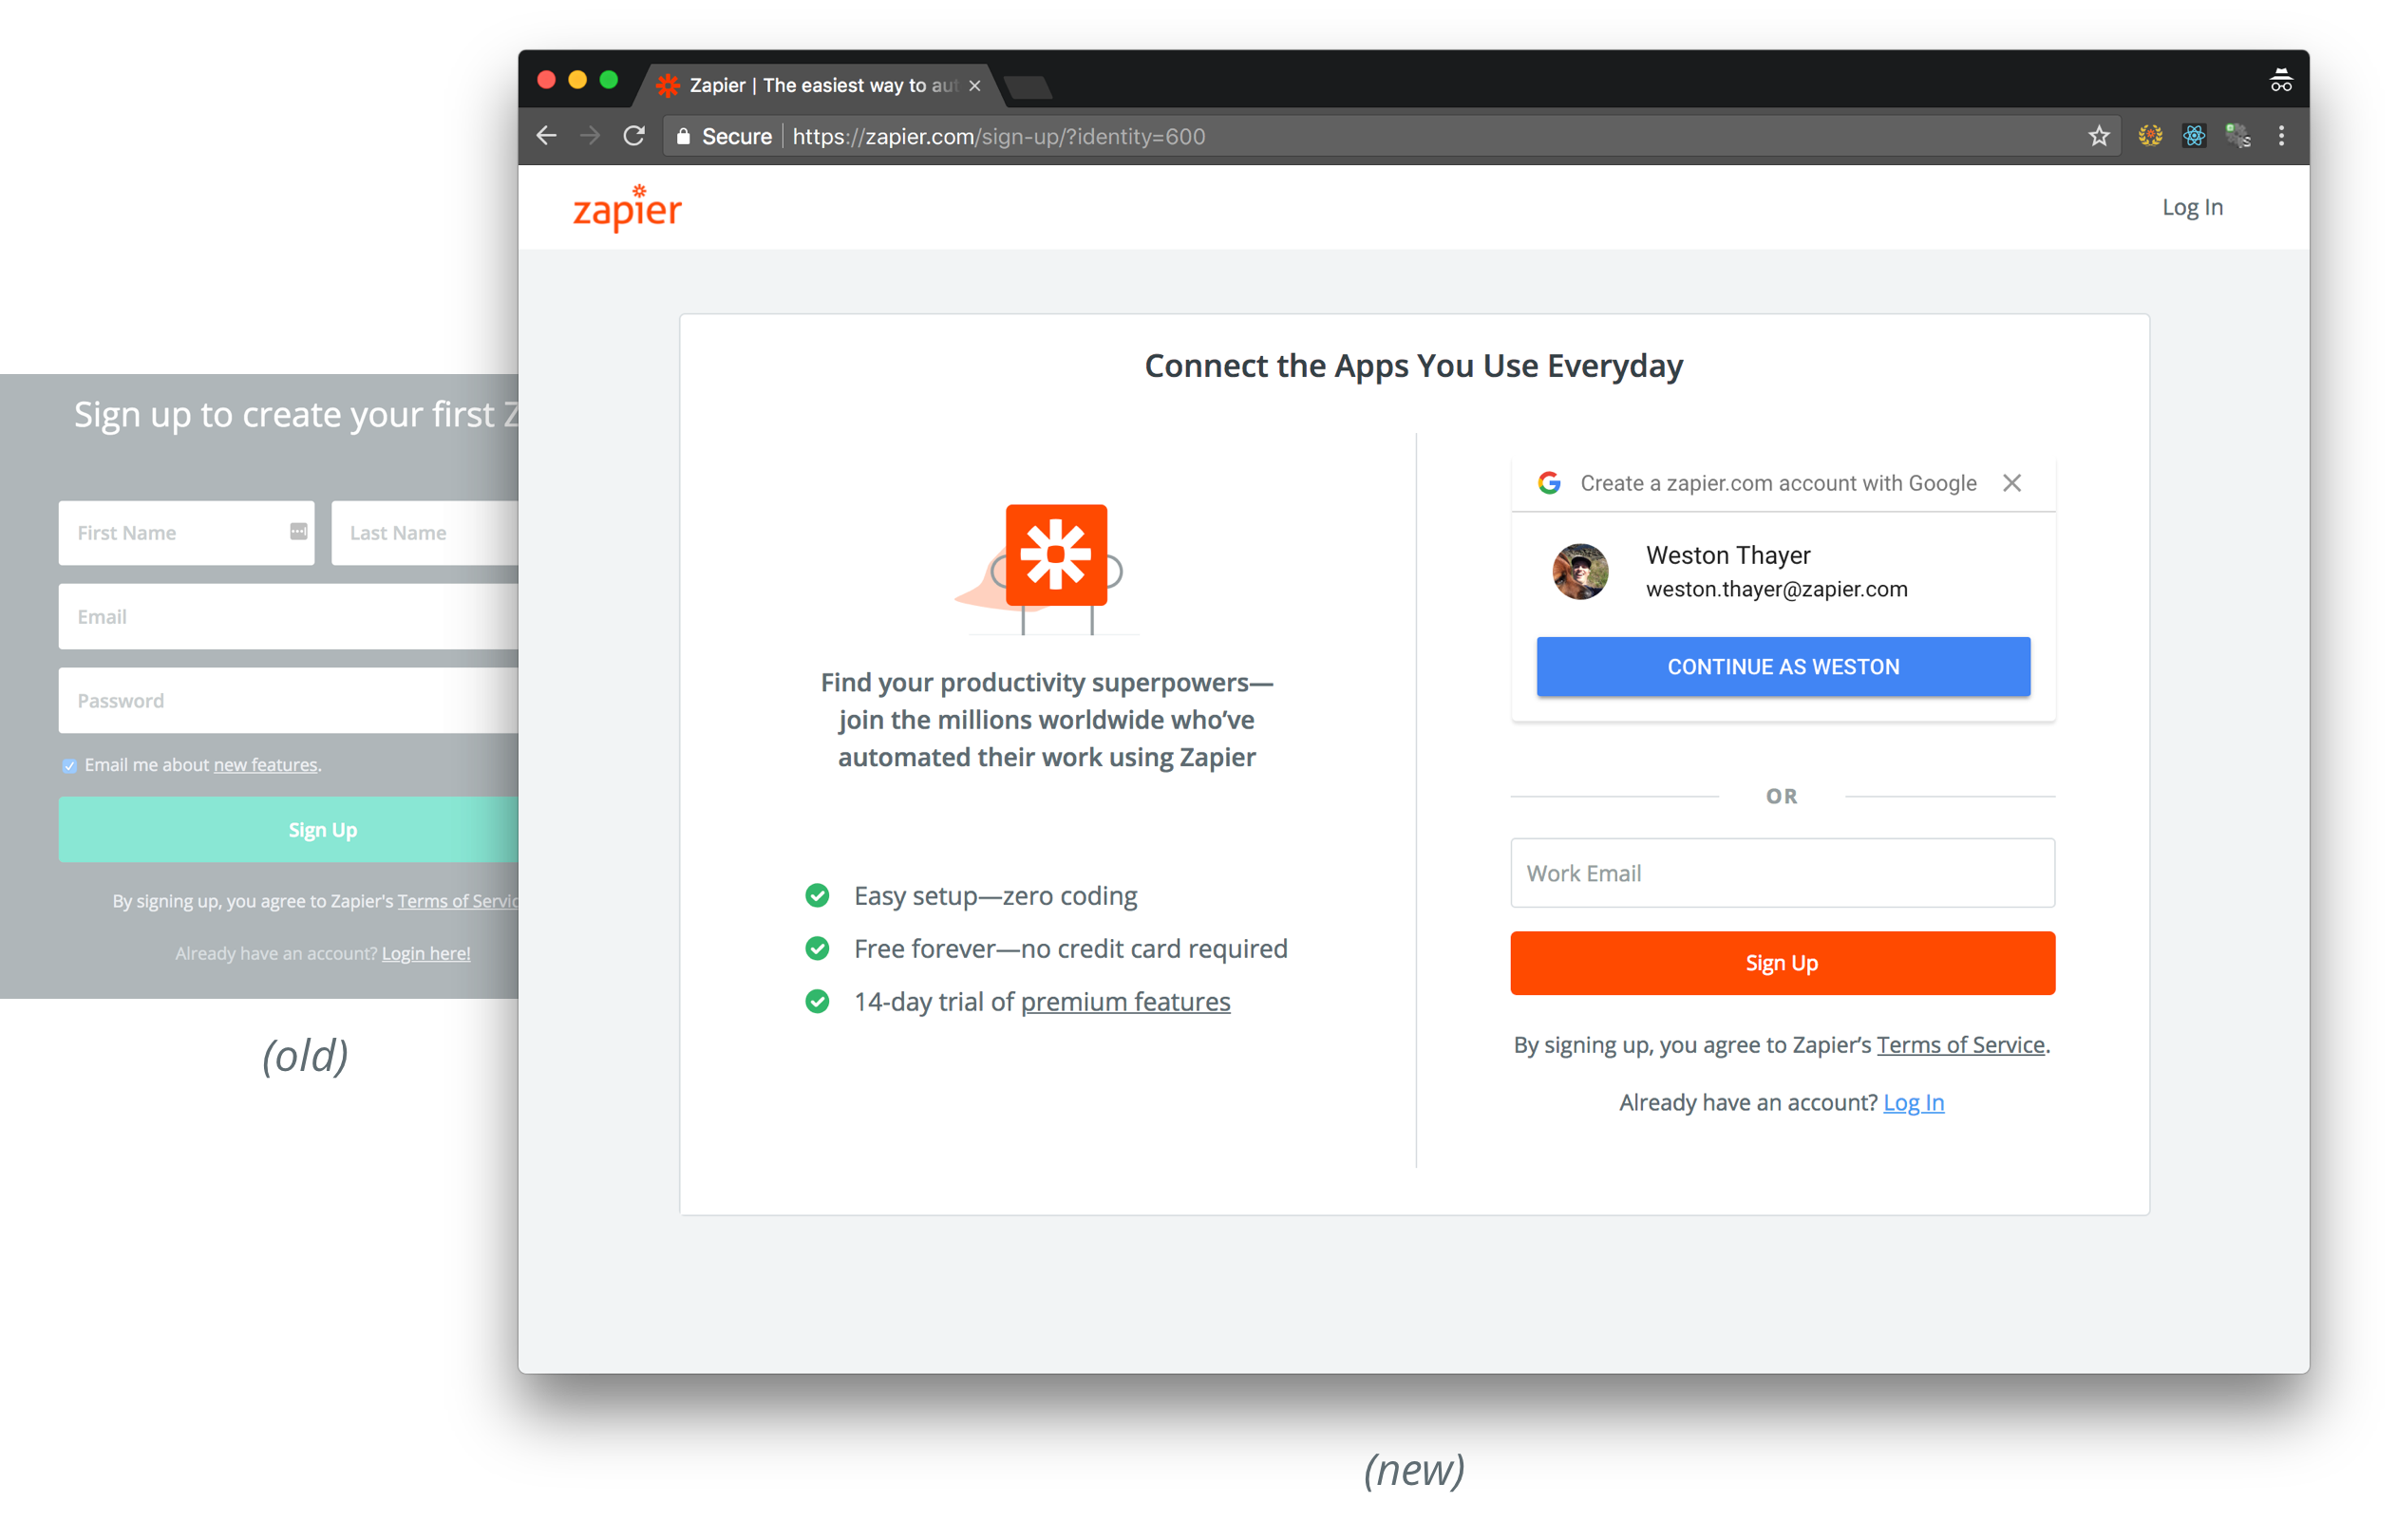 Zapier's sign up page